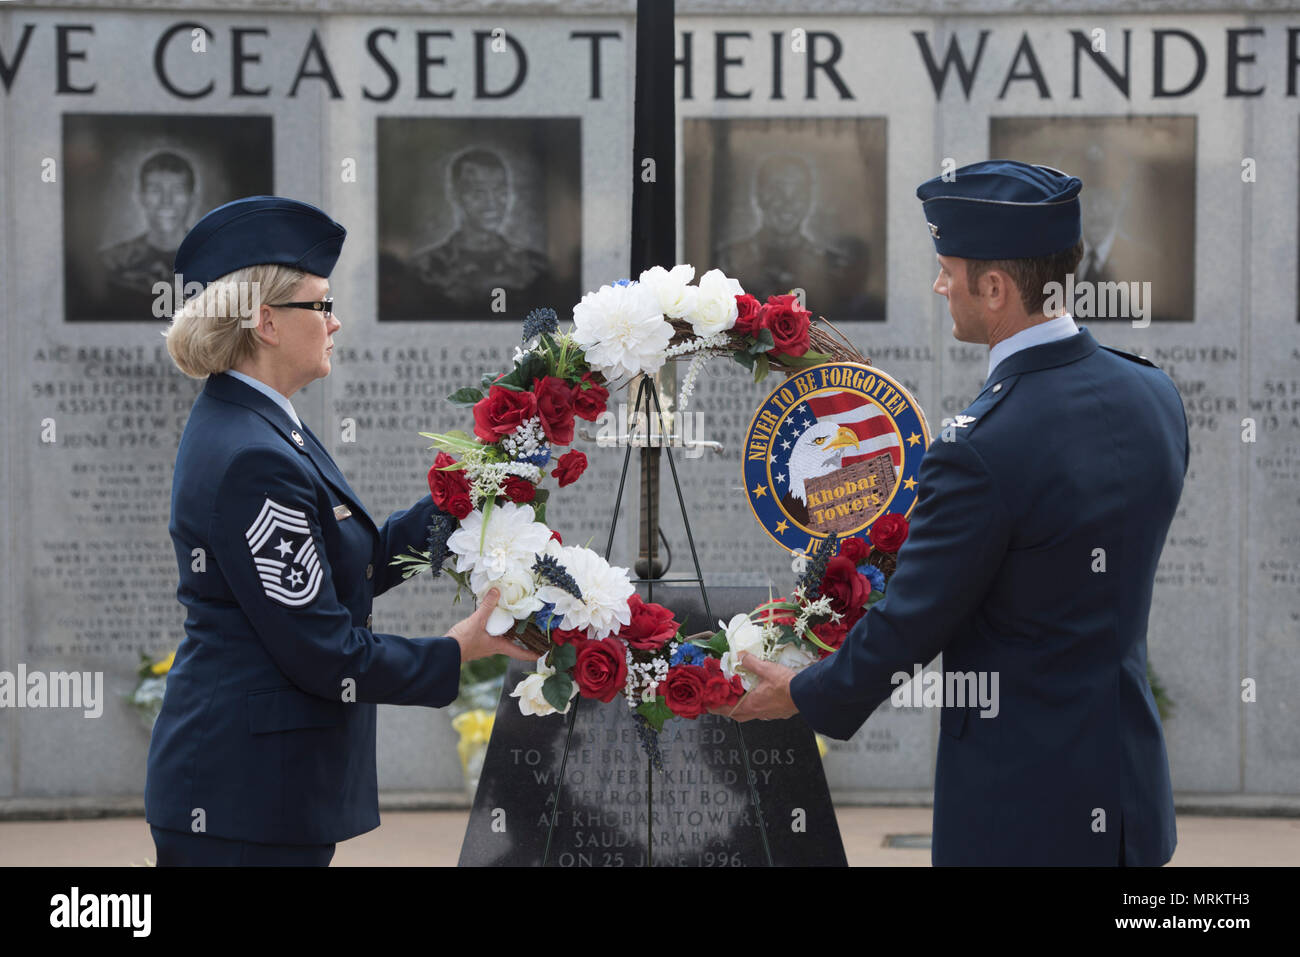 U.S. Air Force Col. Paul Moga, 33rd Fighter Wing commander, right, and Chief Master Sgt. Shelley Cohen, 307th Bomb Wing command chief, place a wreath in front of the burning sword during the Khobar Towers 21st Anniversary Wreath Laying Ceremony June 23, 2017, at Eglin Air Force Base, Florida. On June 25, 1996, a bomb was detonated near the Khobar Towers housing complex in Dhahran, Saudi Arabia. Nineteen Airmen were killed and more than 400 U.S. and international military and civilians were injured in the blast.  Of the 19 killed, 12 were Nomads. Each year the 33 FW holds a ceremony in remembra Stock Photo